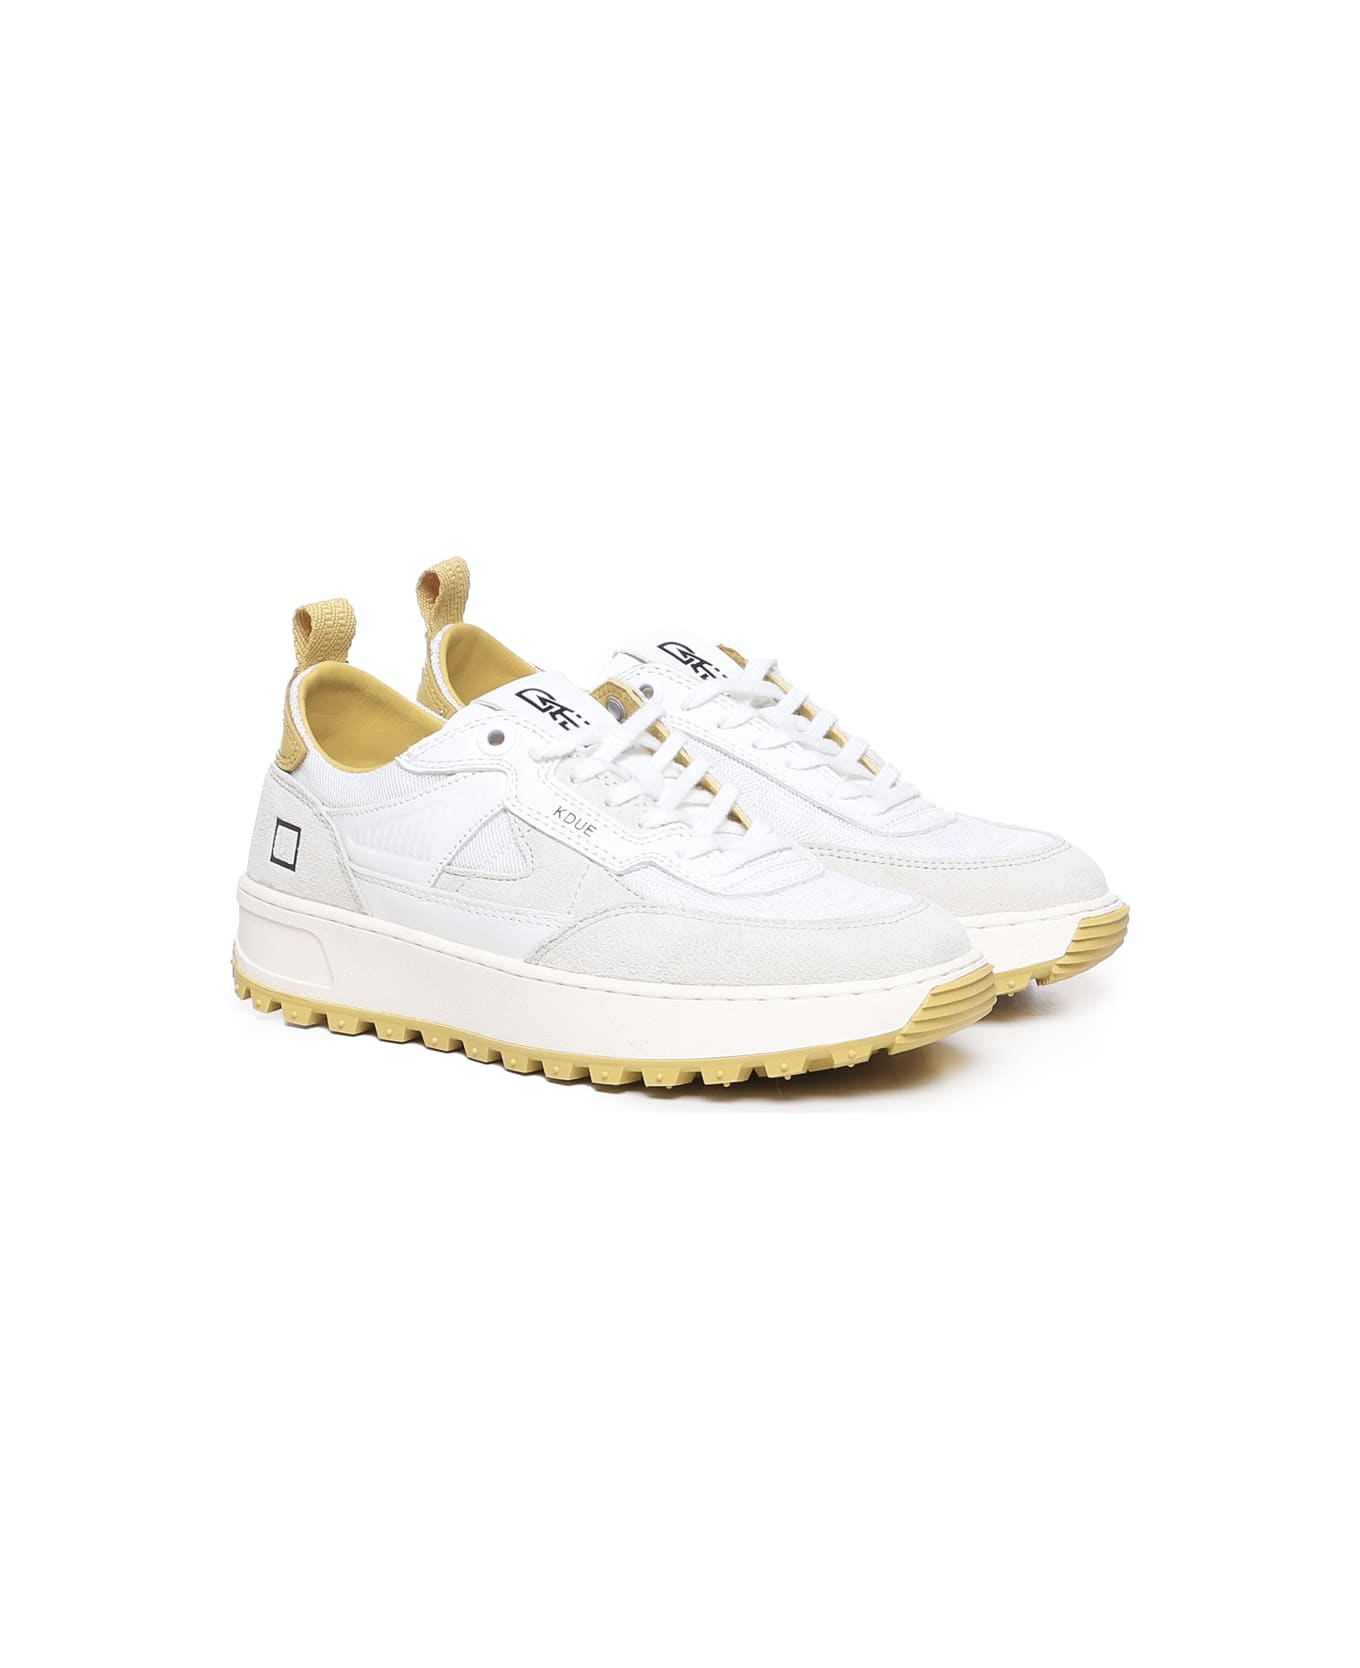 D.A.T.E. Kdue Sneakers - White-yellow スニーカー